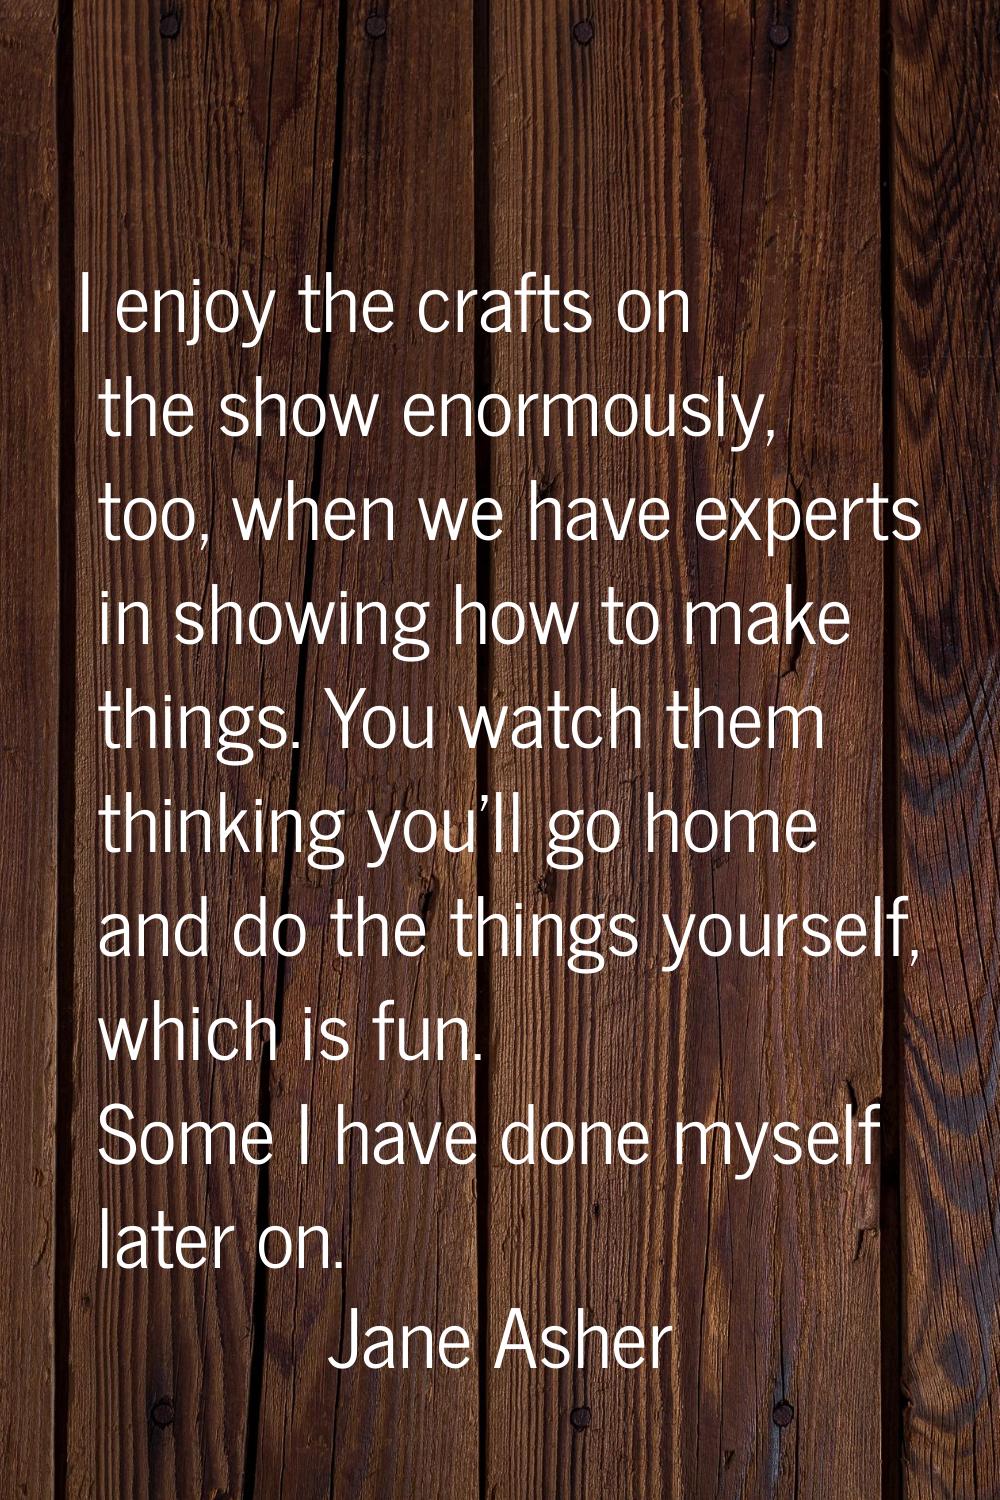 I enjoy the crafts on the show enormously, too, when we have experts in showing how to make things.